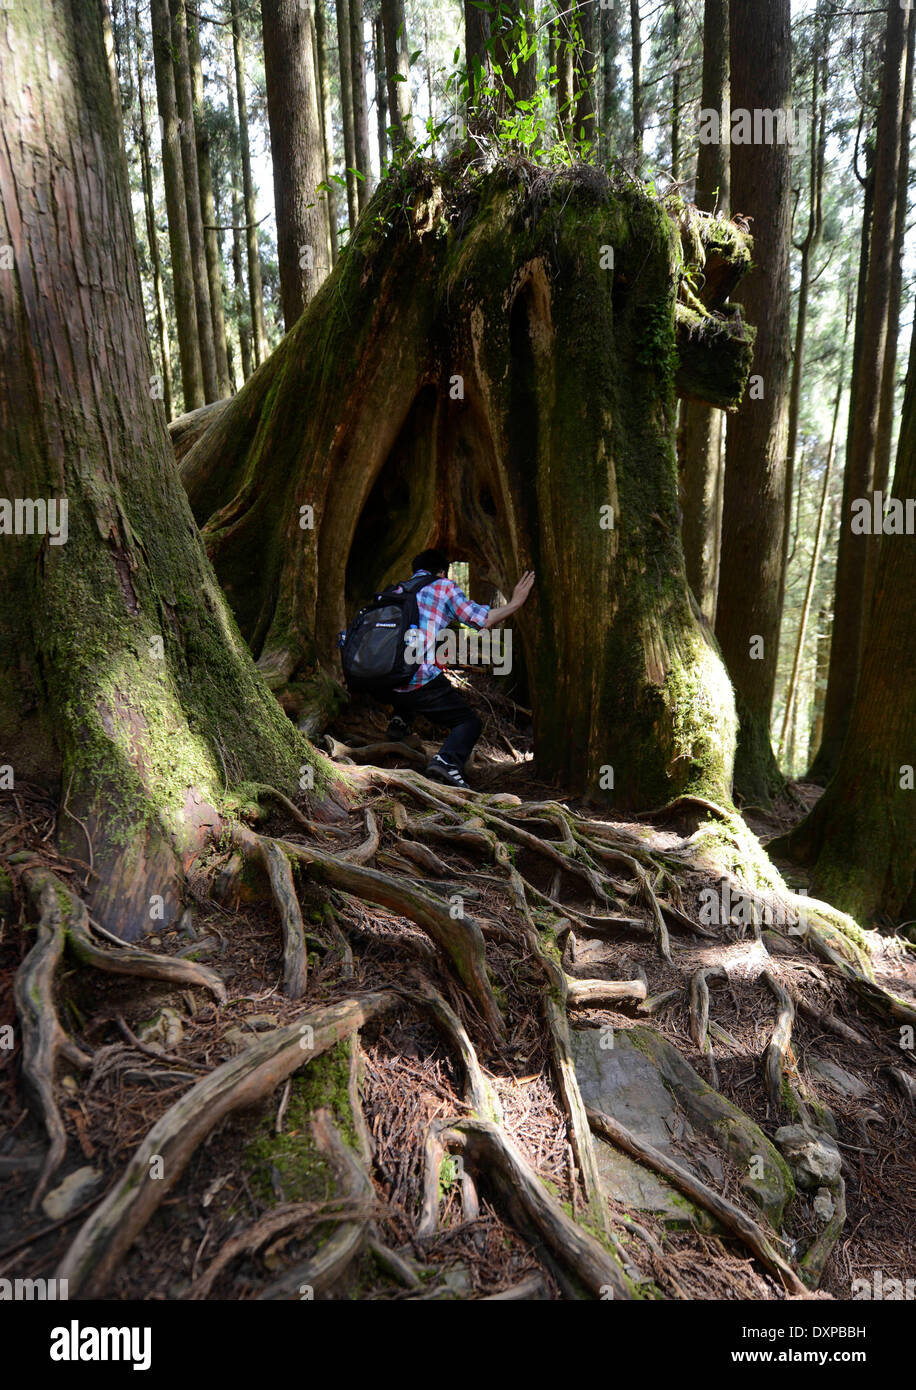 Chiayi, China's Taiwan. 28th Mar, 2014. A tourist visits a Formosan cypress forest in the Ali Mountain in Chiayi County, southeast China's Taiwan, March 28, 2014. The Ali Mountain in central Taiwan is home to an abundance of Formosan cypresses (Chamaecyparis formosensis), which are an endemic species. During Taiwan's Japanese occupation period (1895-1945), the Formosan cypresses of the Ali Mountain were shipped to Japan in substantial amounts for architectural use. Still, a considerable number of them outlived the Japanese looting and natural disasters. © Huang Xiaoyong/Xinhua/Alamy Live News Stock Photo